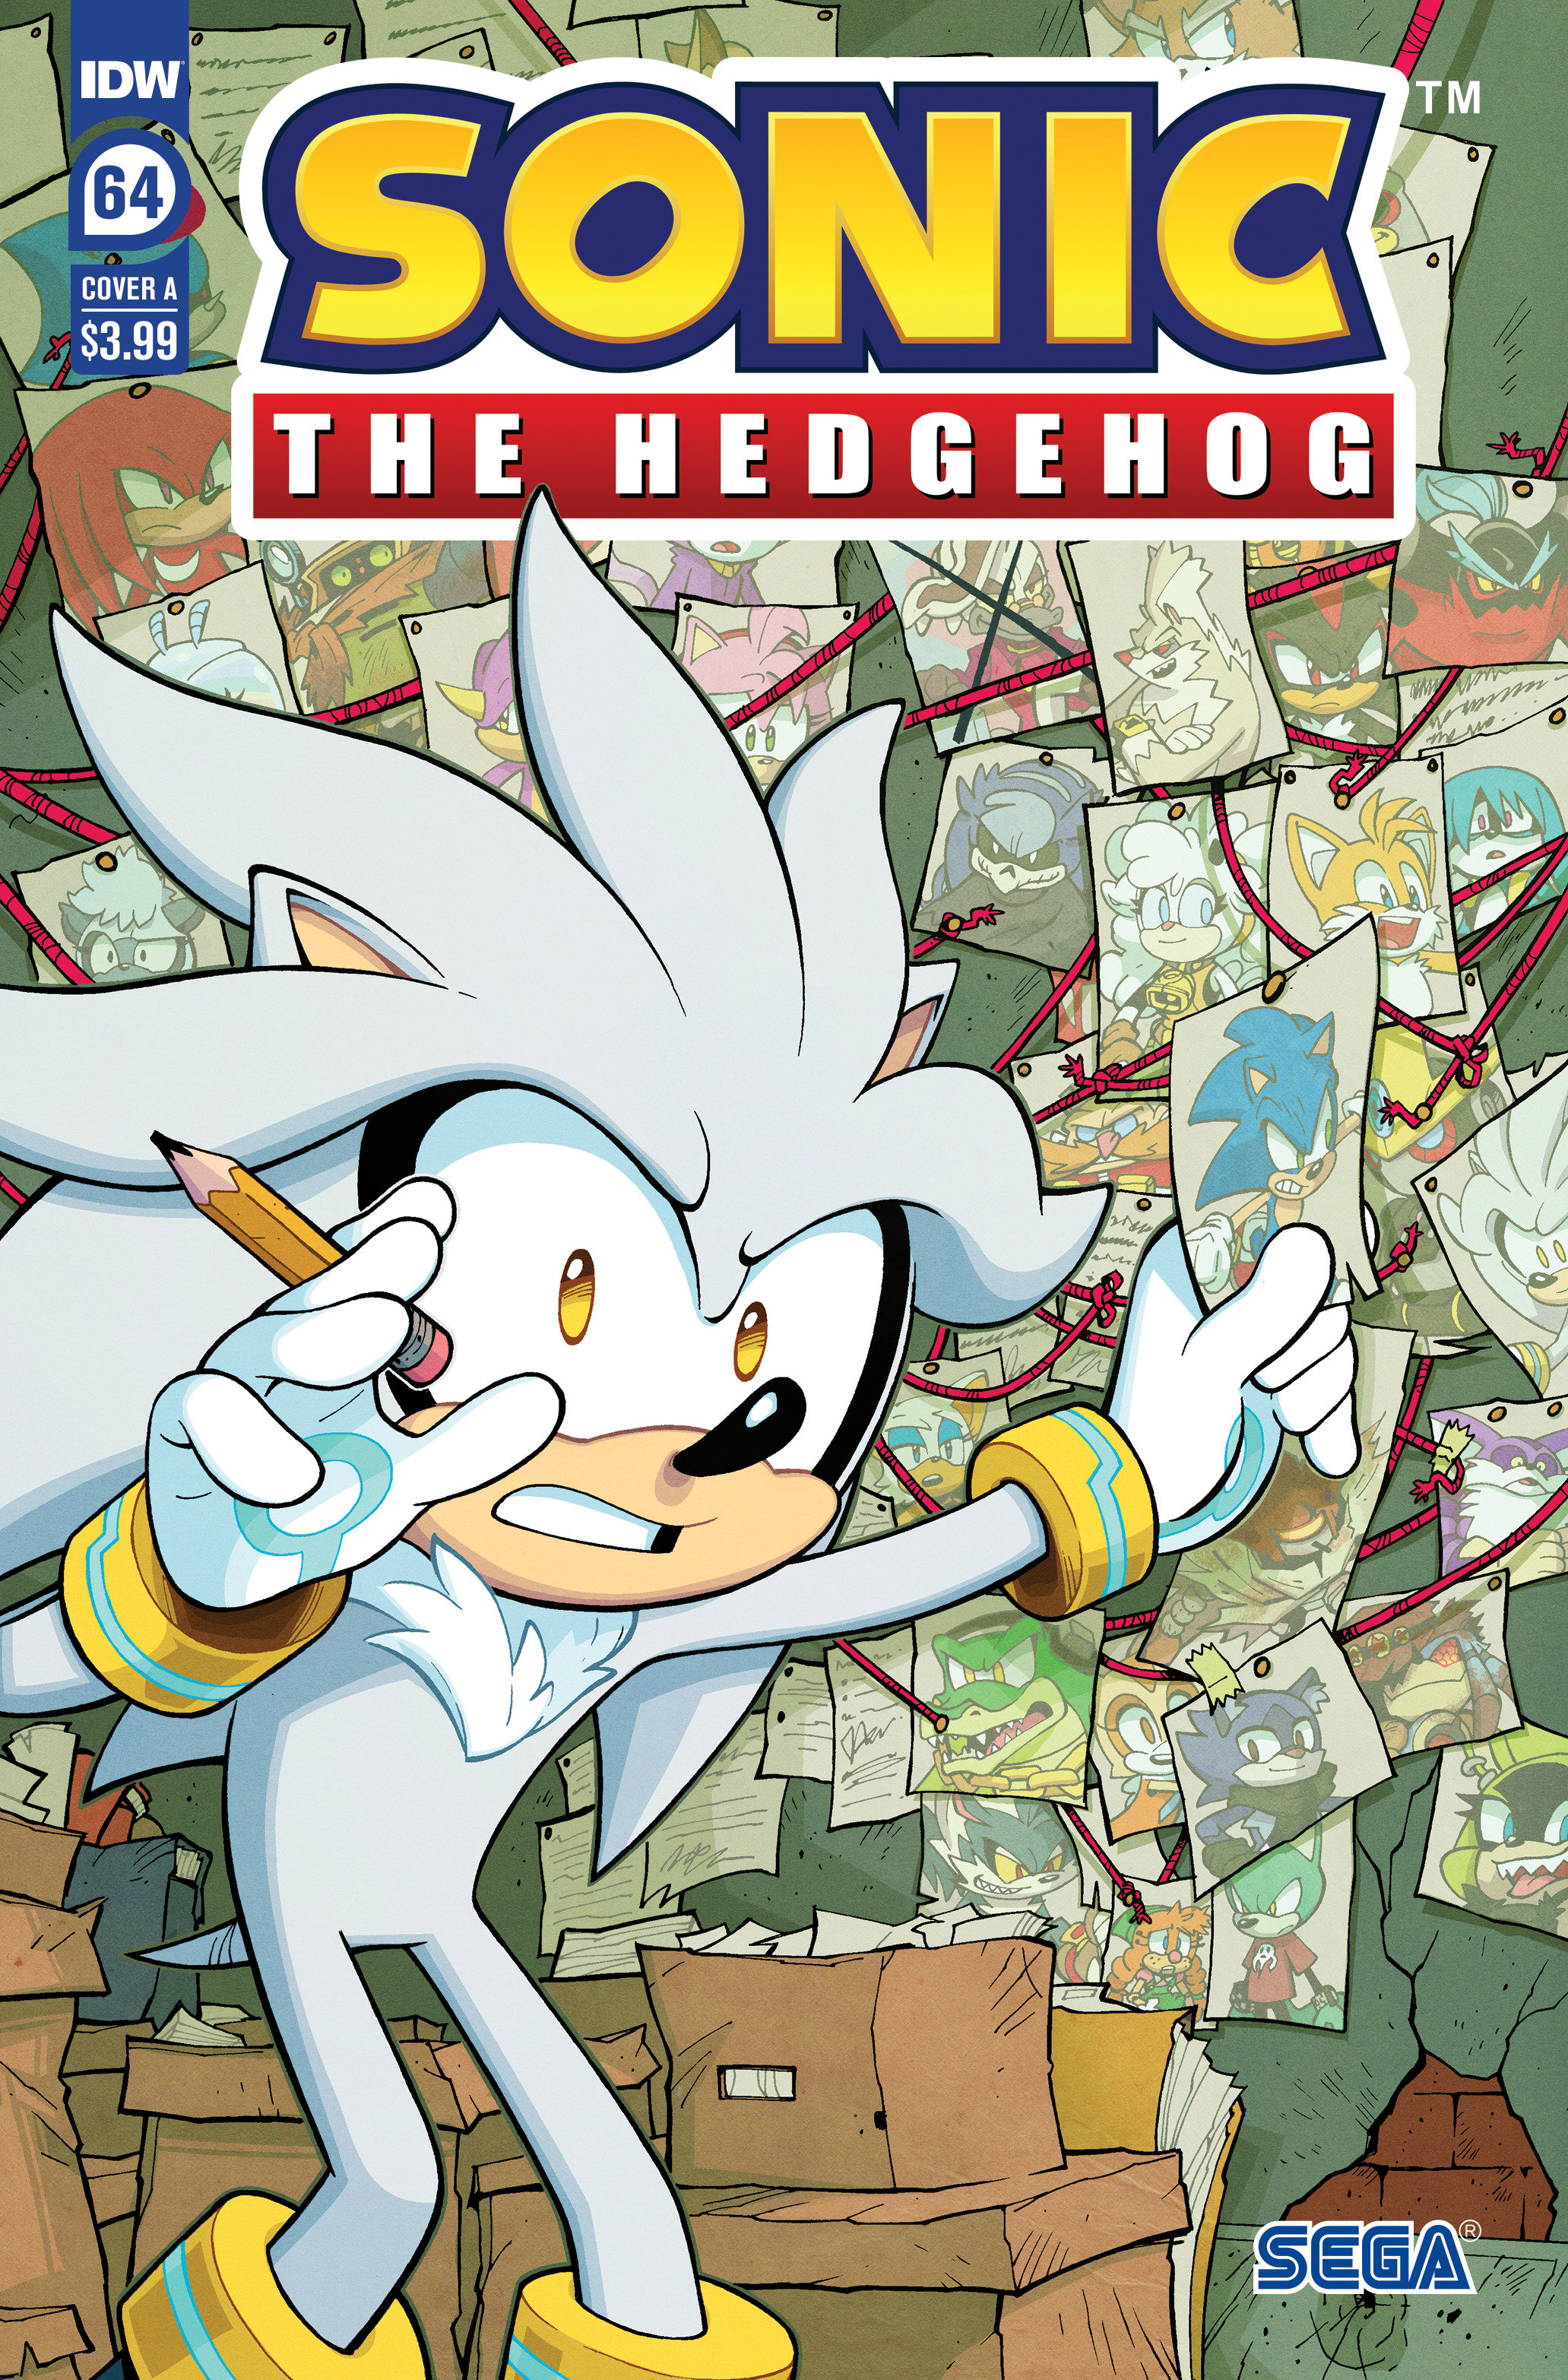 Sonic the Hedgehog #64 Cover A Lawrence